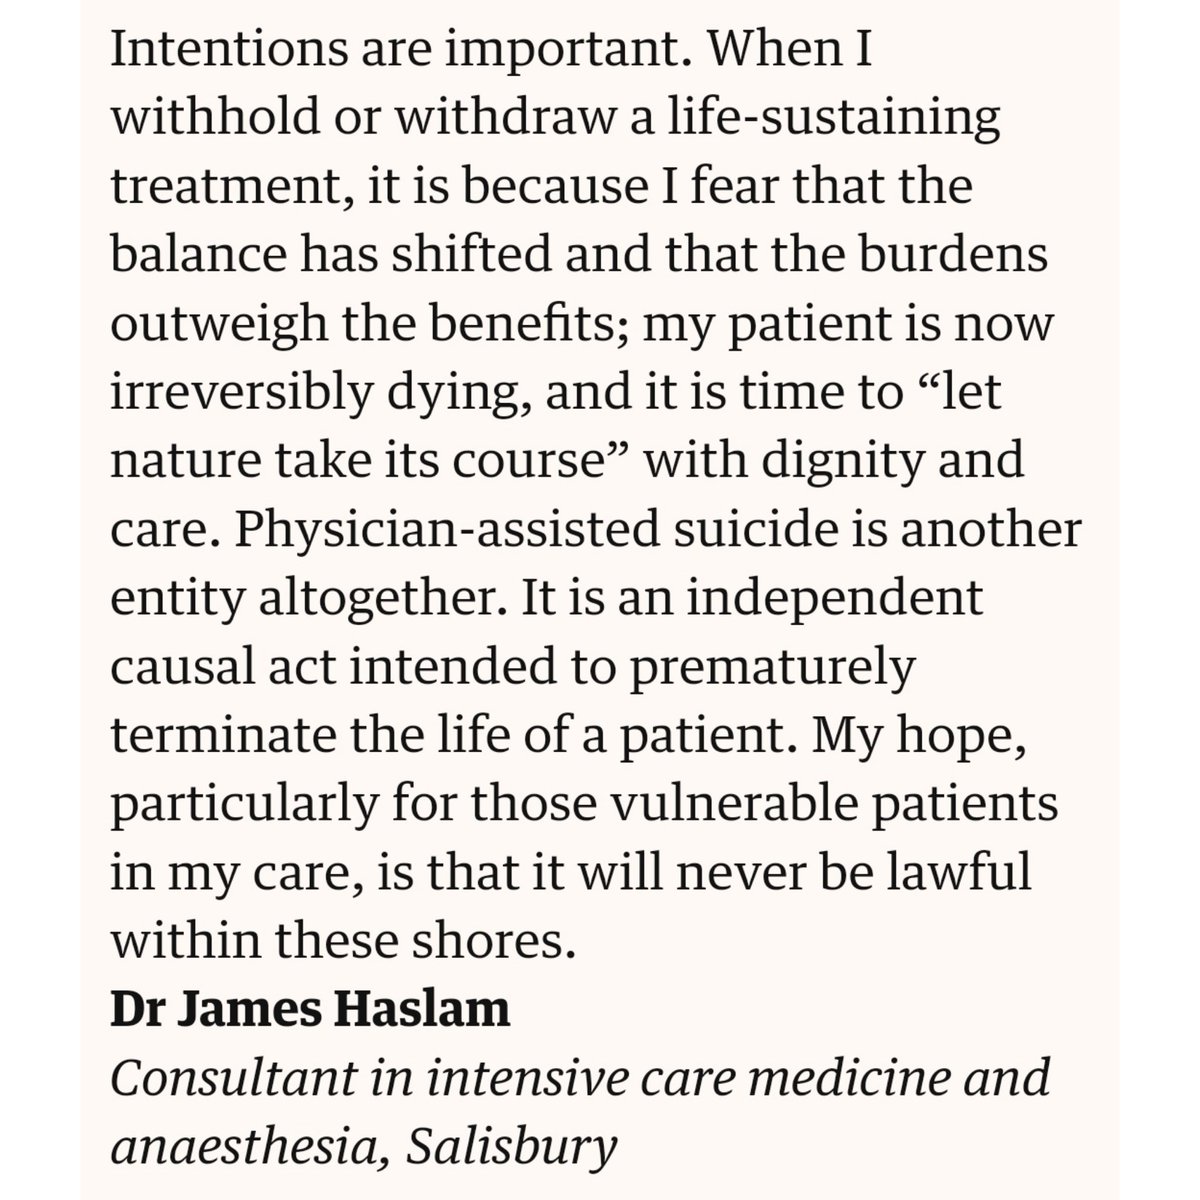 ✍🏻 ‘Withholding or withdrawing futile treatments is not and never has been… “assisted dying” [which] is the modern euphemism for physician-#assistedsuicide and #euthanasia, both forms of medicalised killing.’ theguardian.com/society/articl…